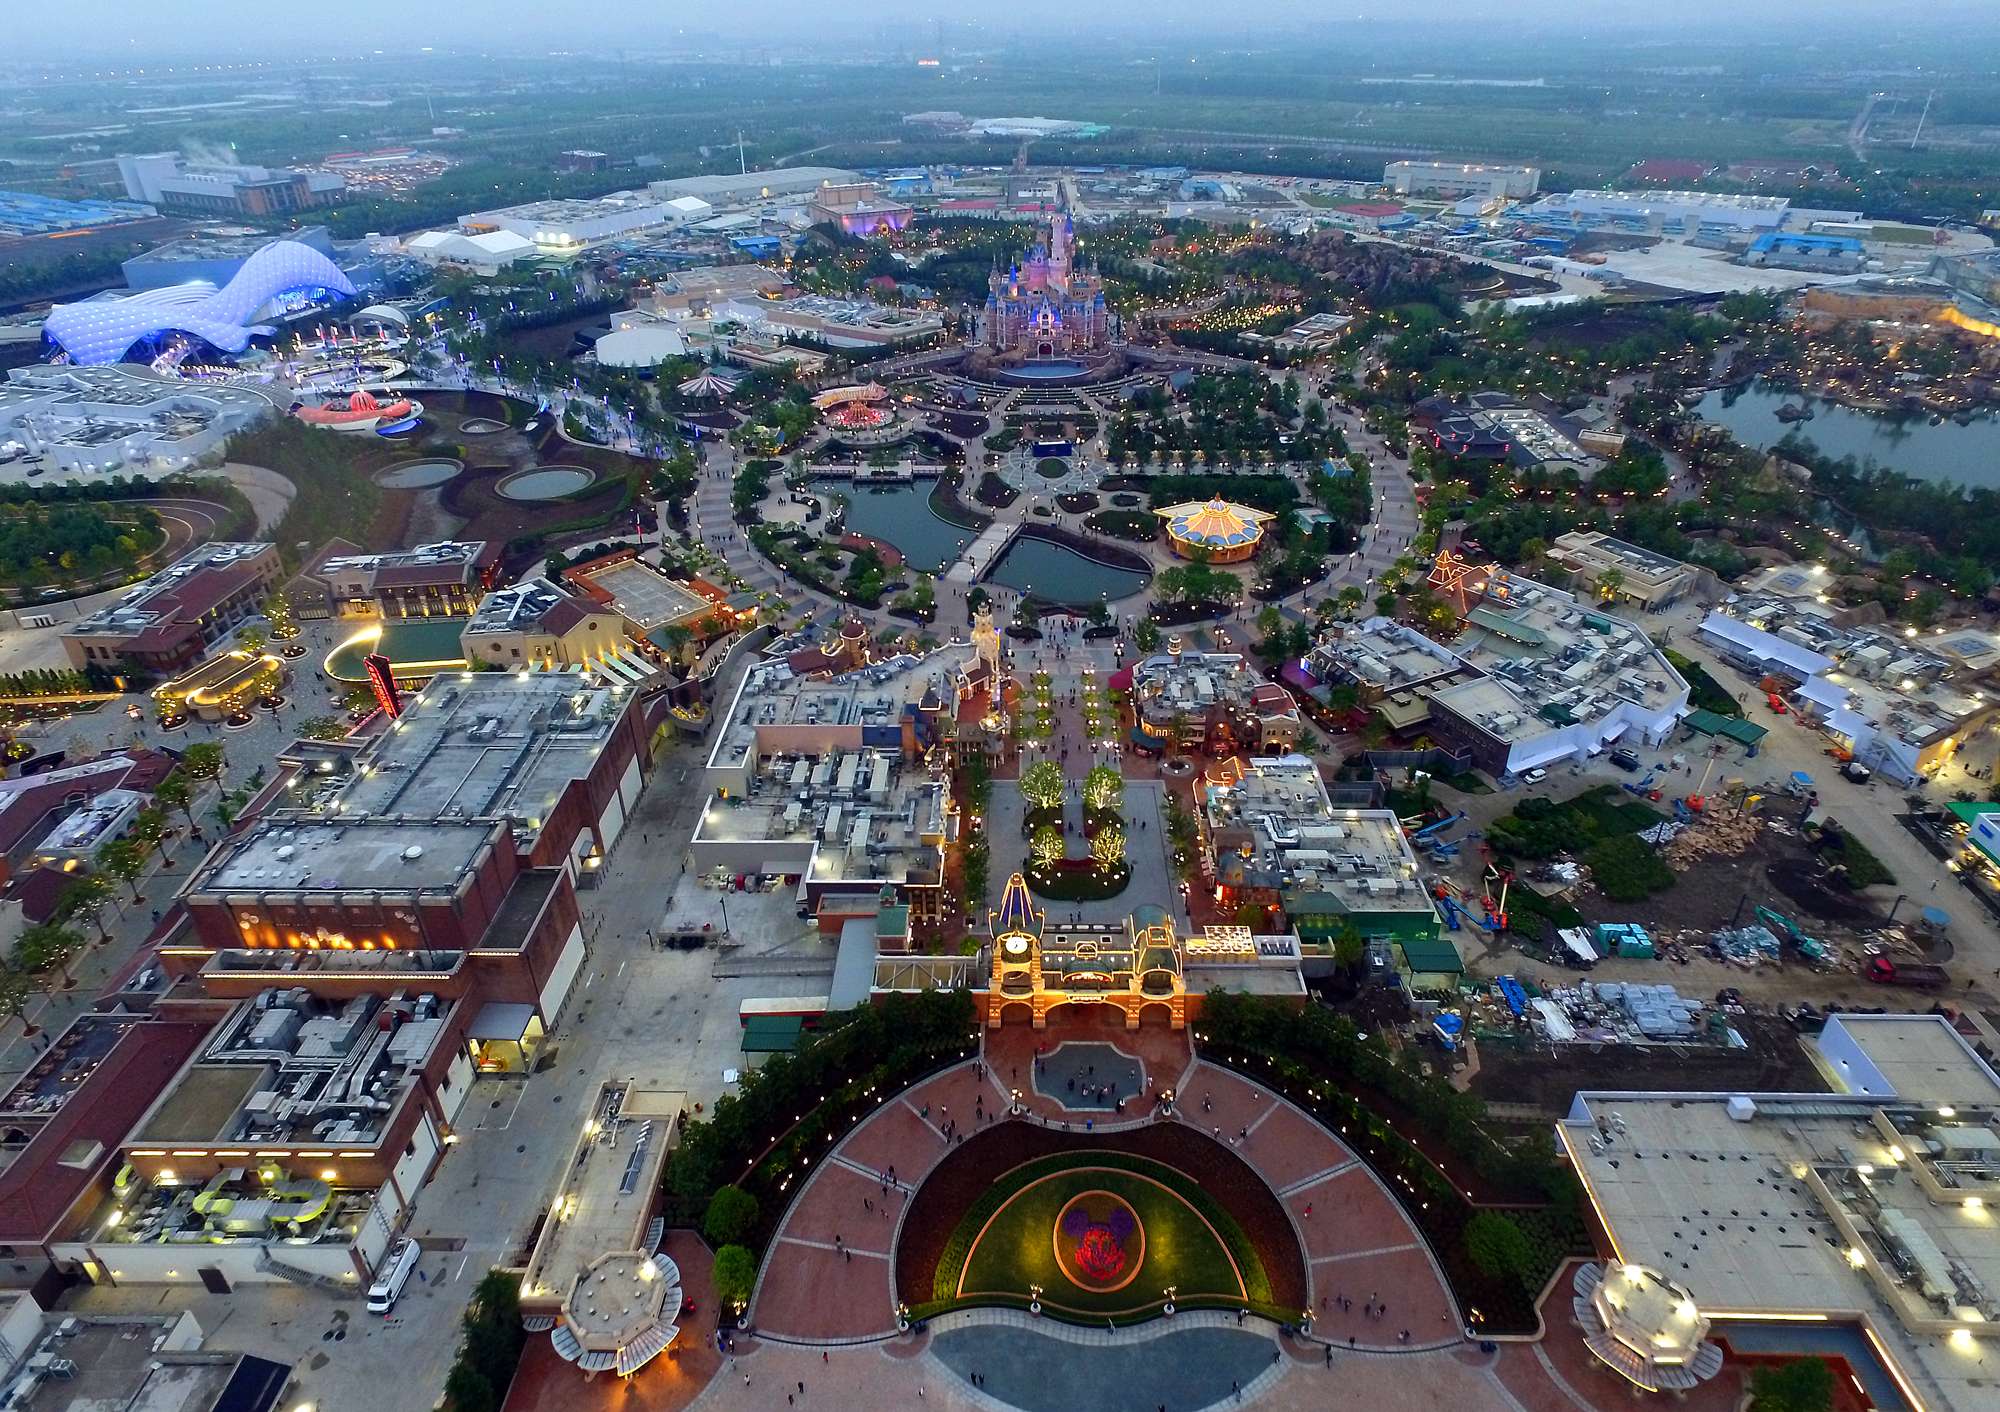 The area around Shanghai Disney has a Metro railway link and the potential to develop into a suburban residential area. Photo: Xinhua